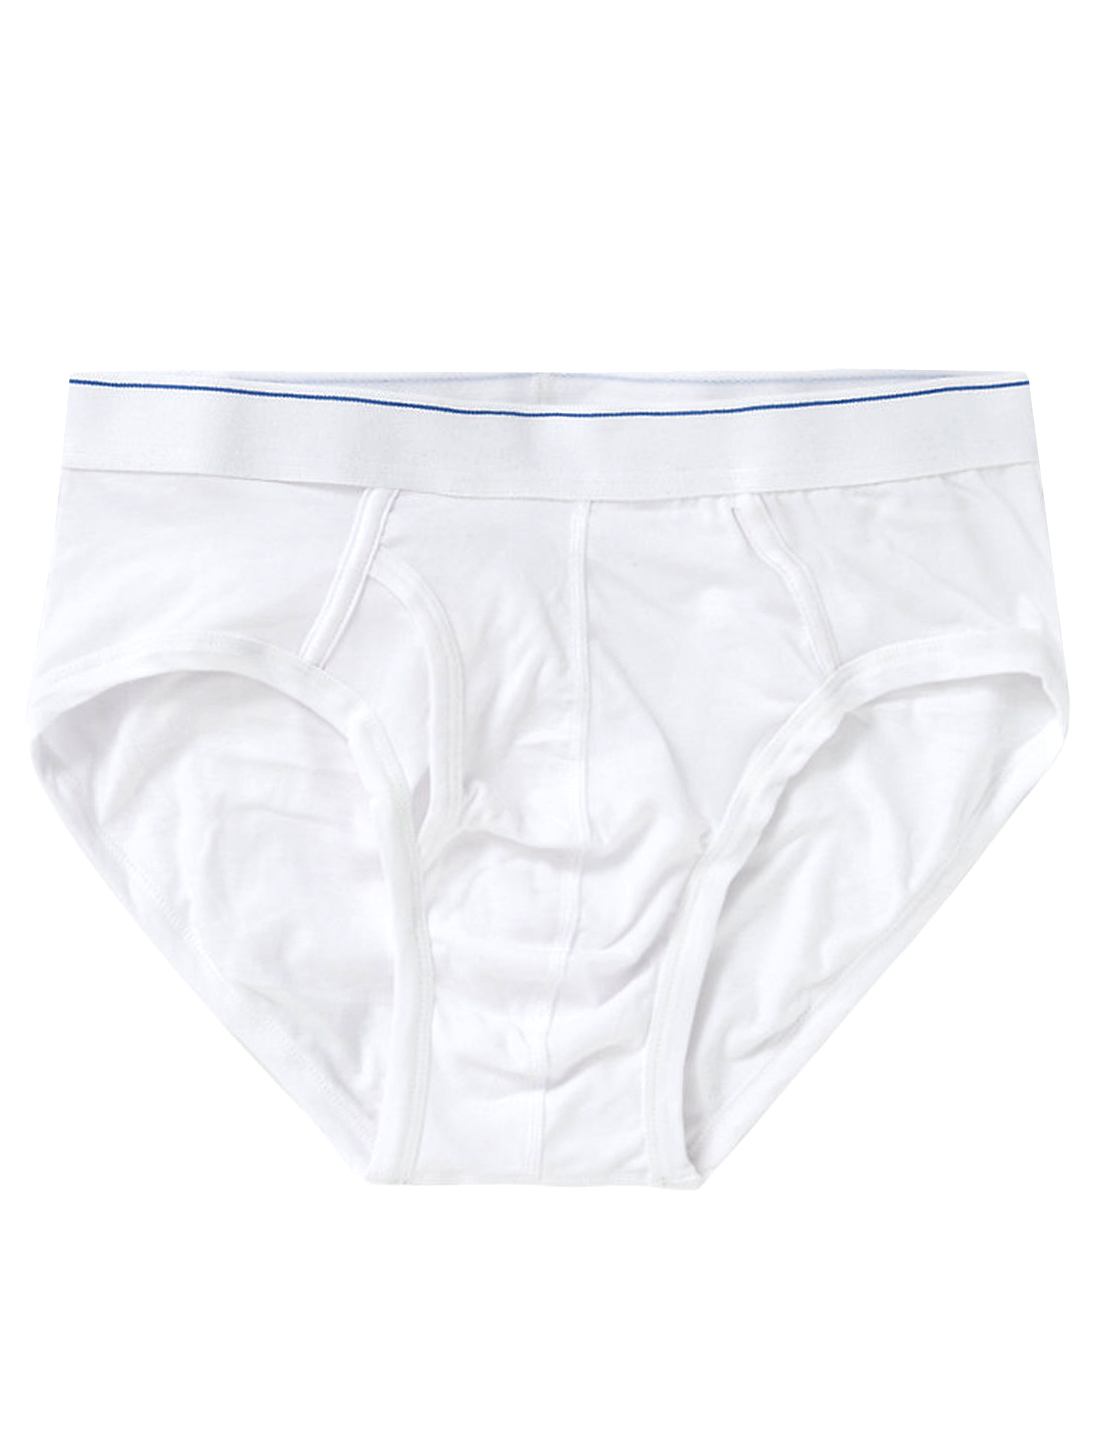 Marks and Spencer - - M&5 WHITE Cool & Fresh Stretch Cotton Briefs ...